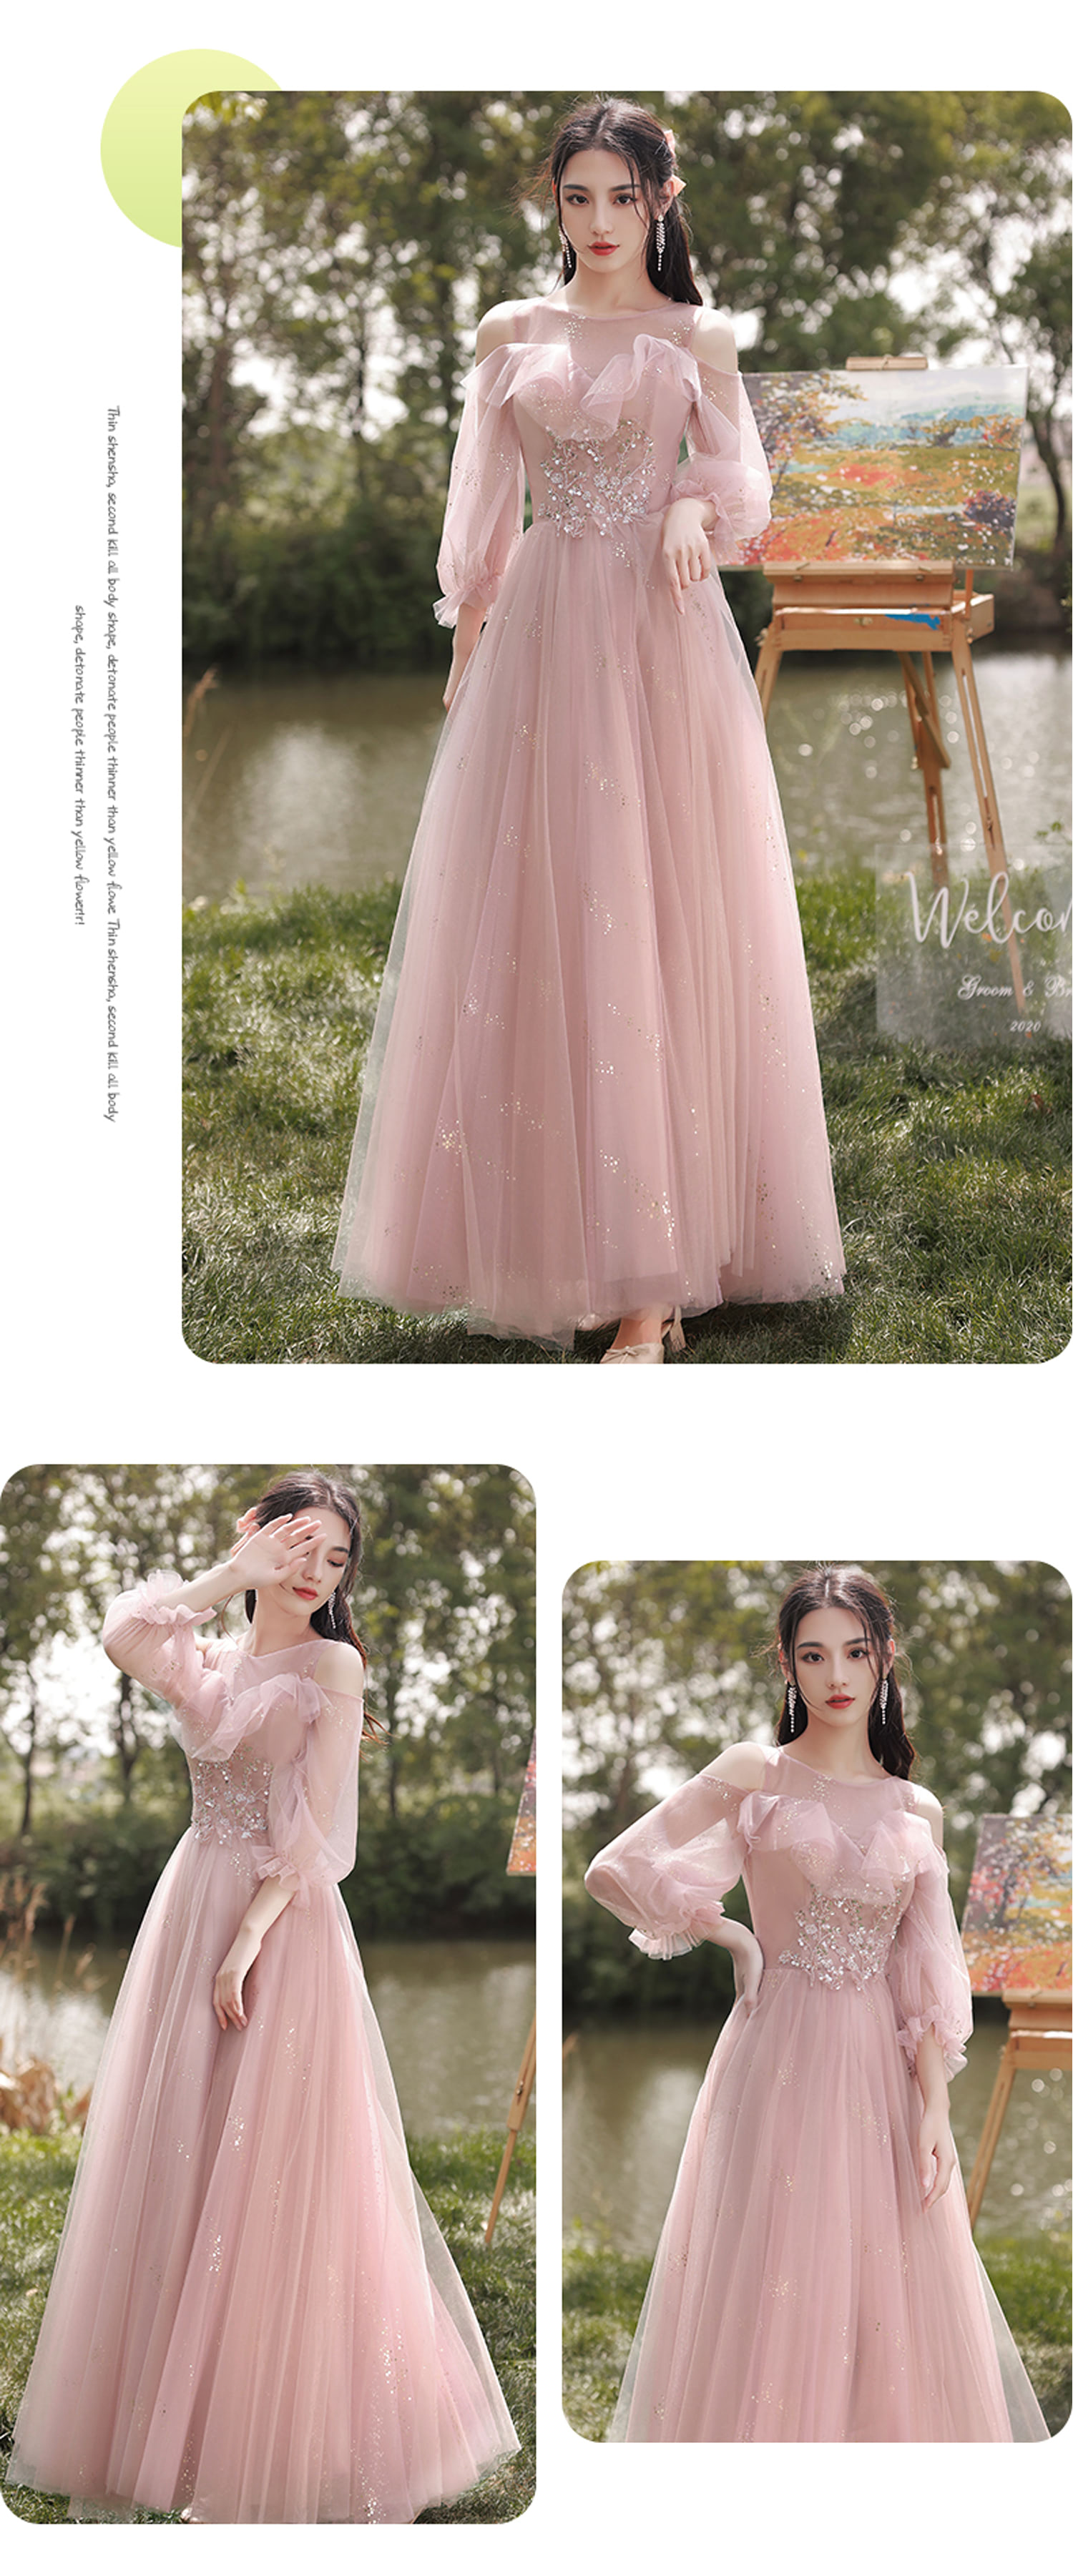 Romantic-Pink-Bridal-Party-Dress-Elegant-Occasions-Formal-Gown19.jpg